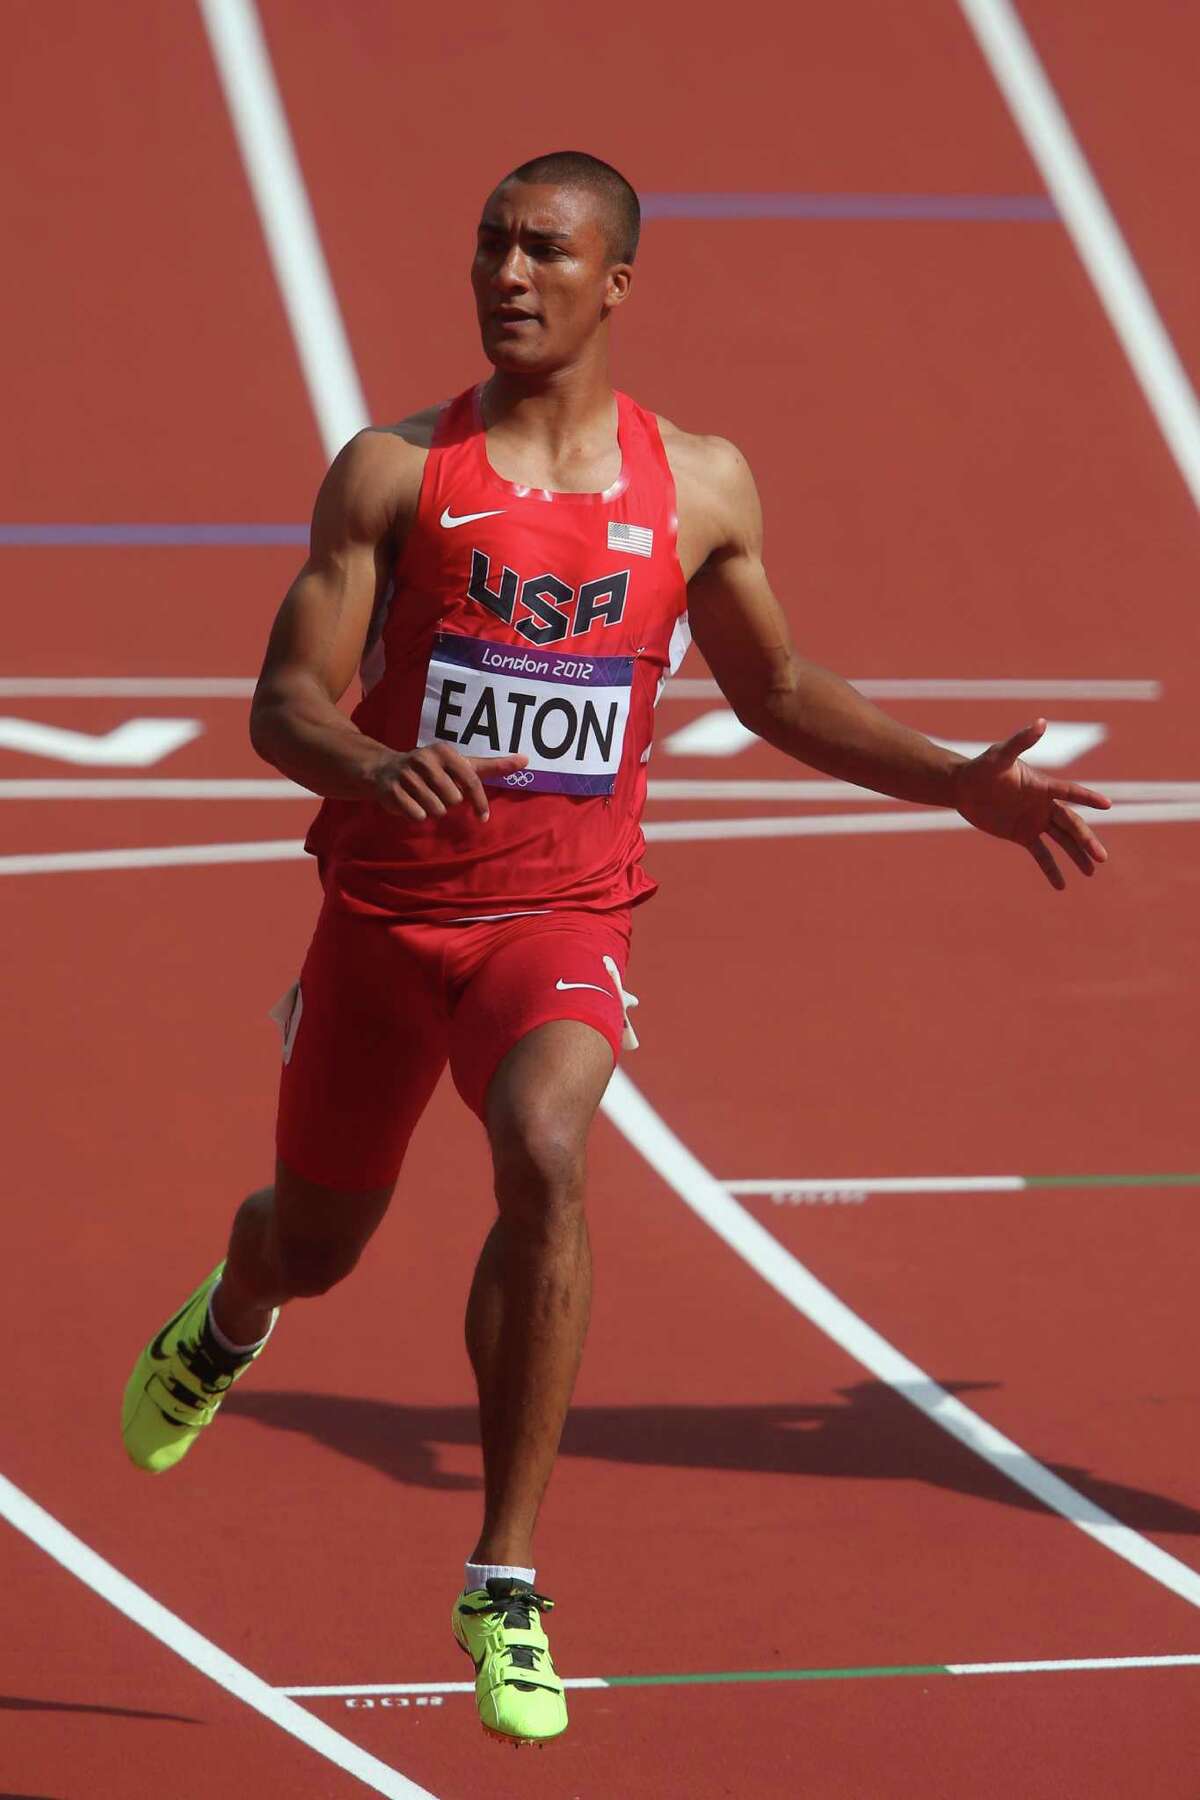 LONDON, ENGLAND - AUGUST 08: Ashton Eaton of the United States competes in the Men's Decathlon 100m Heats on Day 12 of the London 2012 Olympic Games at Olympic Stadium on August 8, 2012 in London, England.